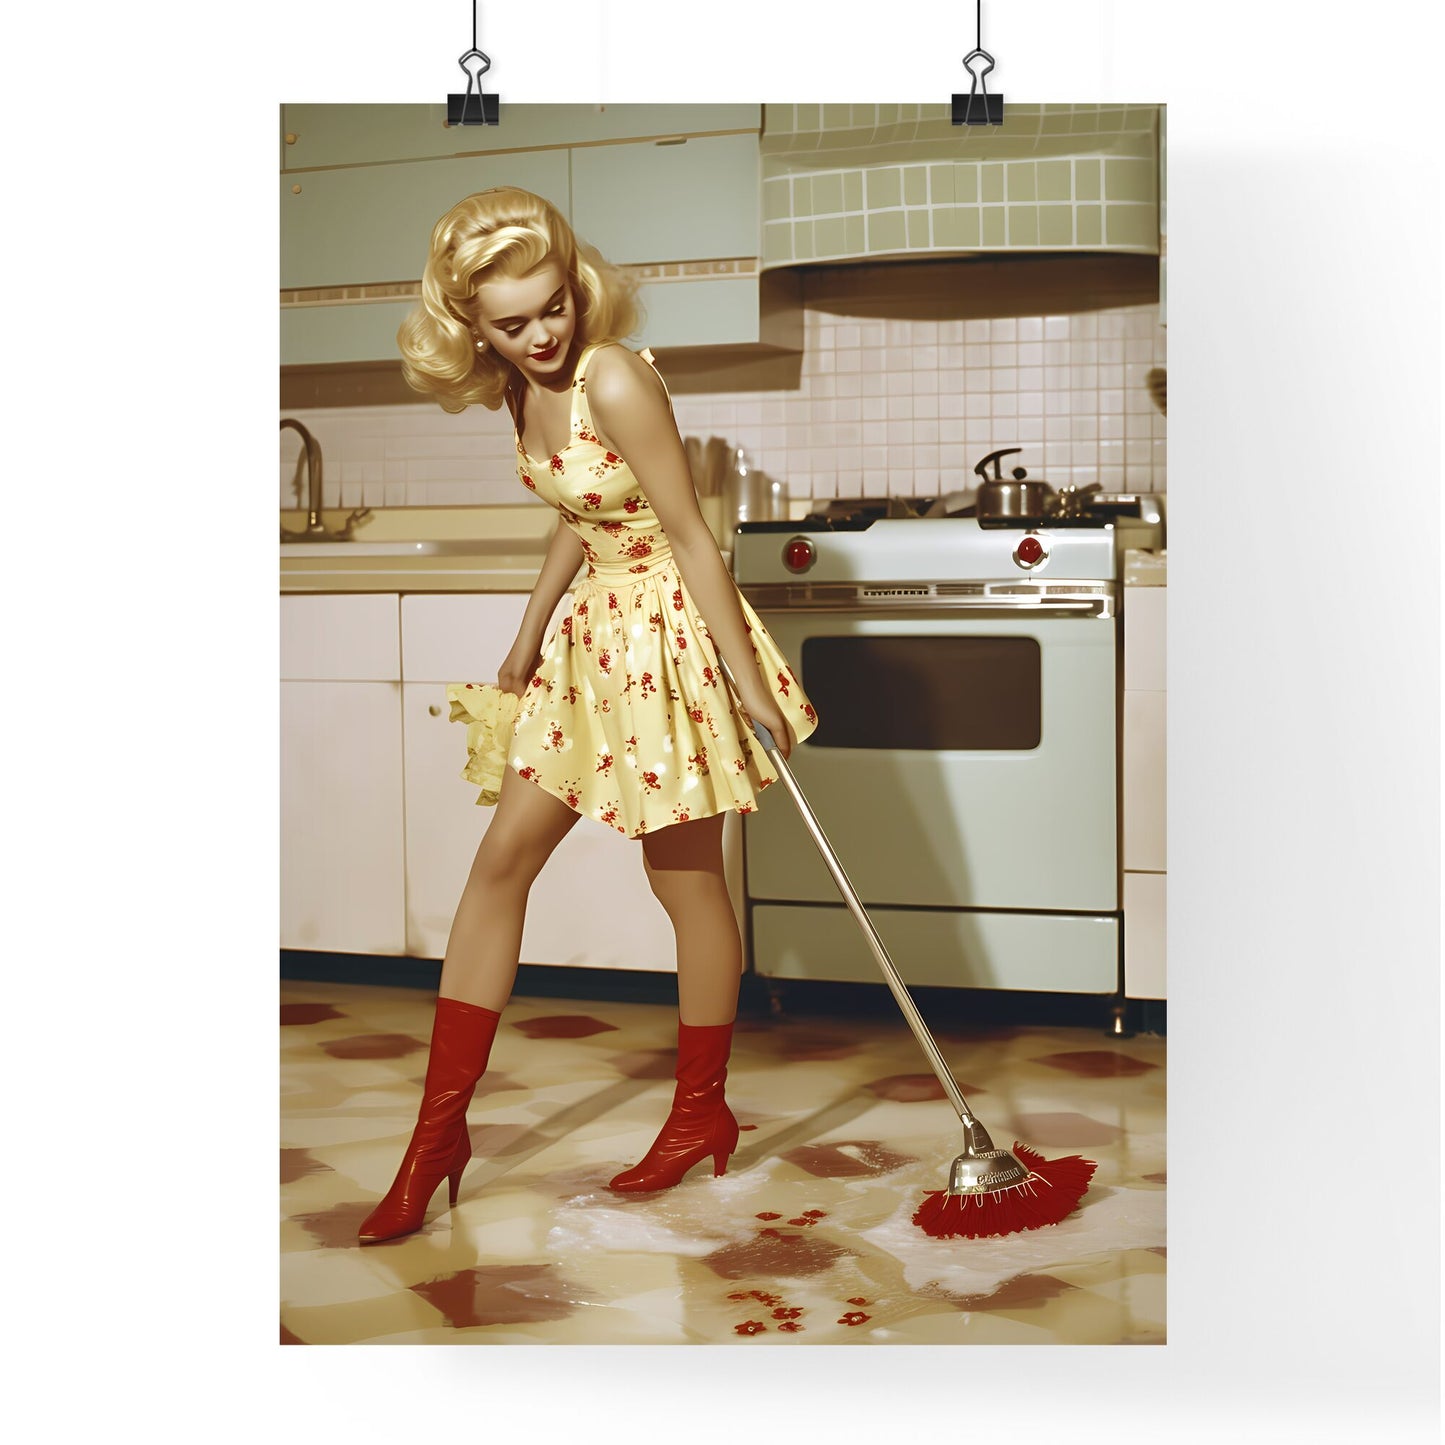 A housewife in a beautiful outfit is cleaning and she is happy, her face is very beautiful - Art print of a woman in a dress sweeping the floor Default Title